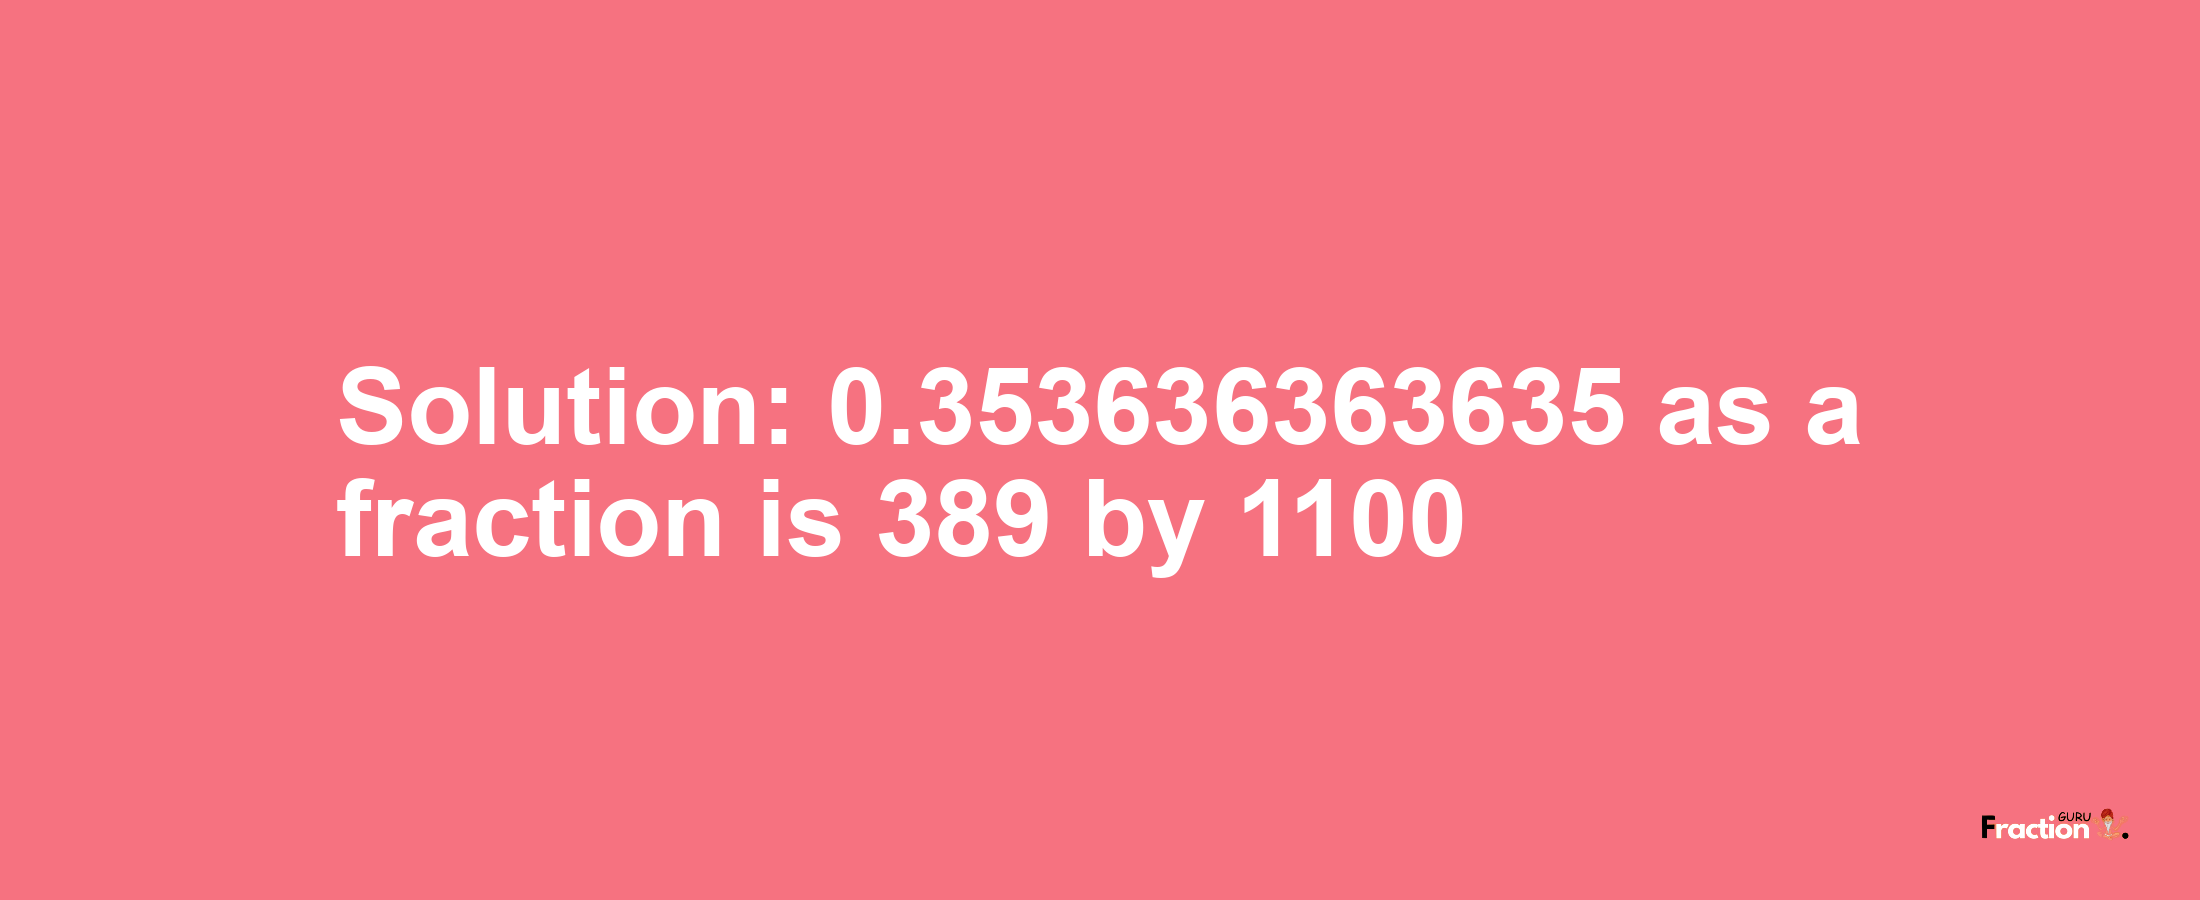 Solution:0.353636363635 as a fraction is 389/1100